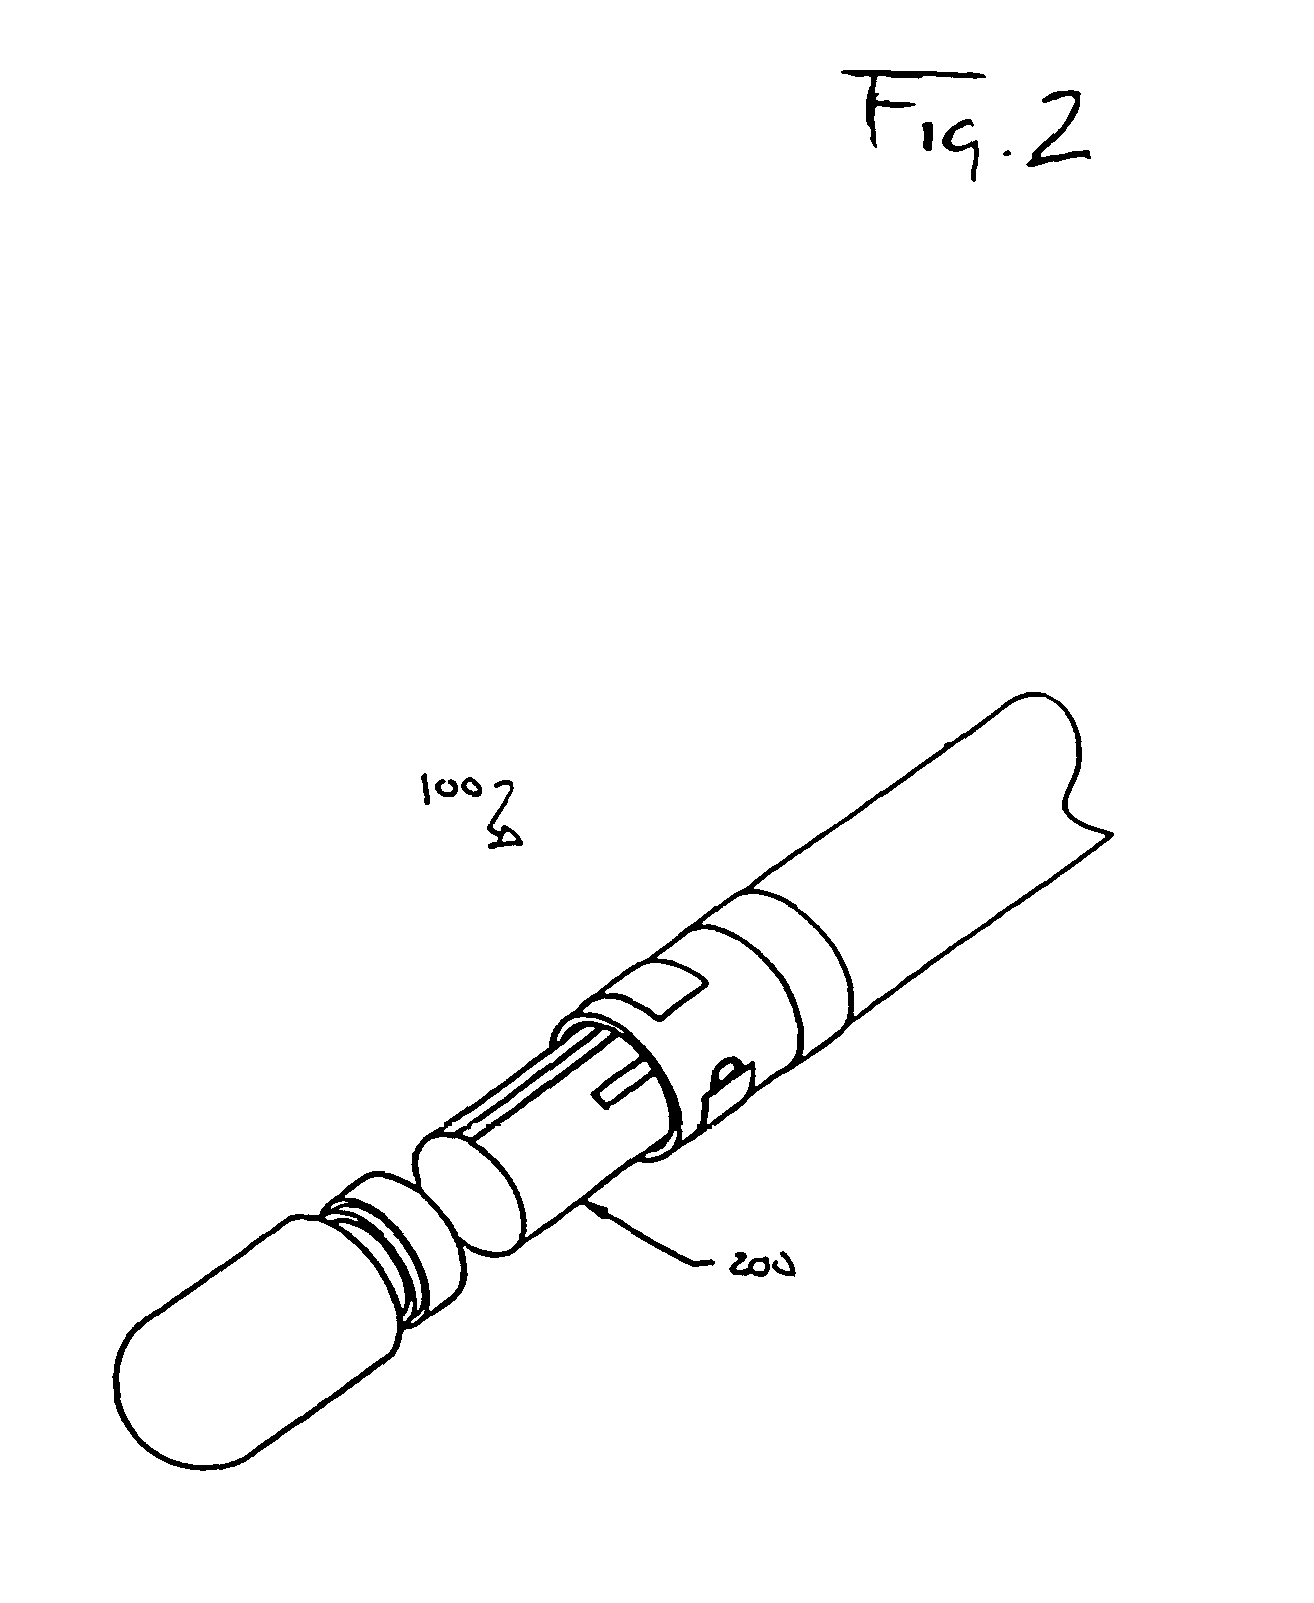 Medical device having integral traces and formed electrodes